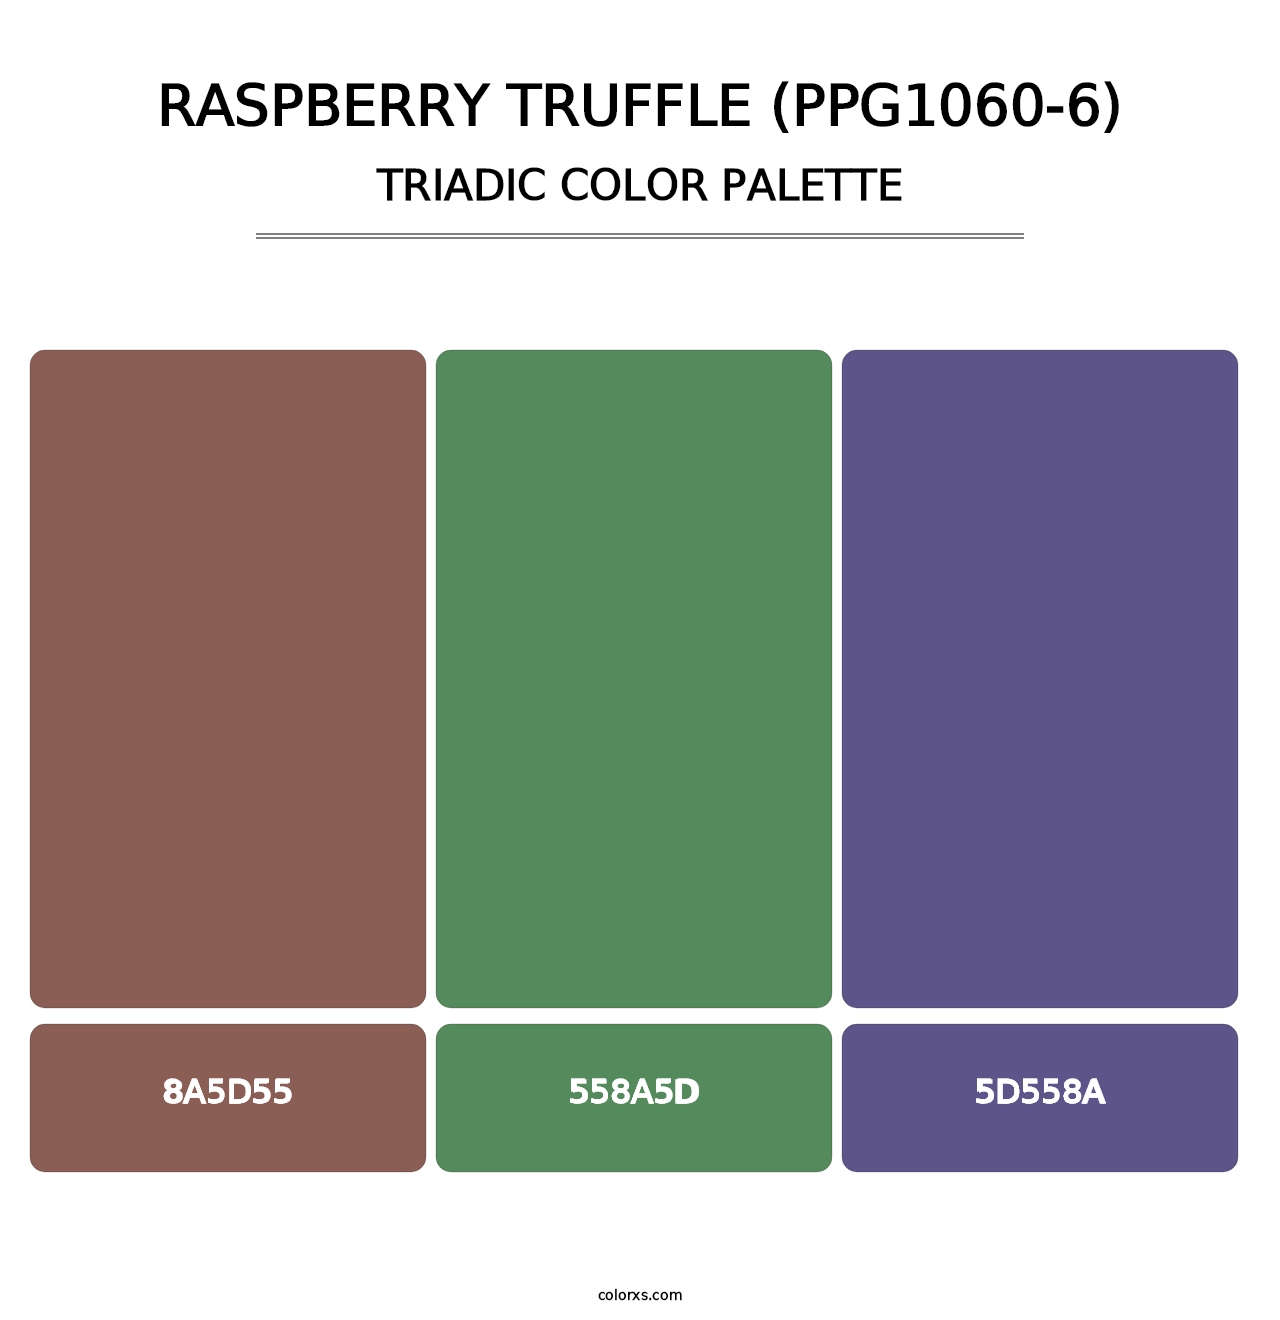 Raspberry Truffle (PPG1060-6) - Triadic Color Palette